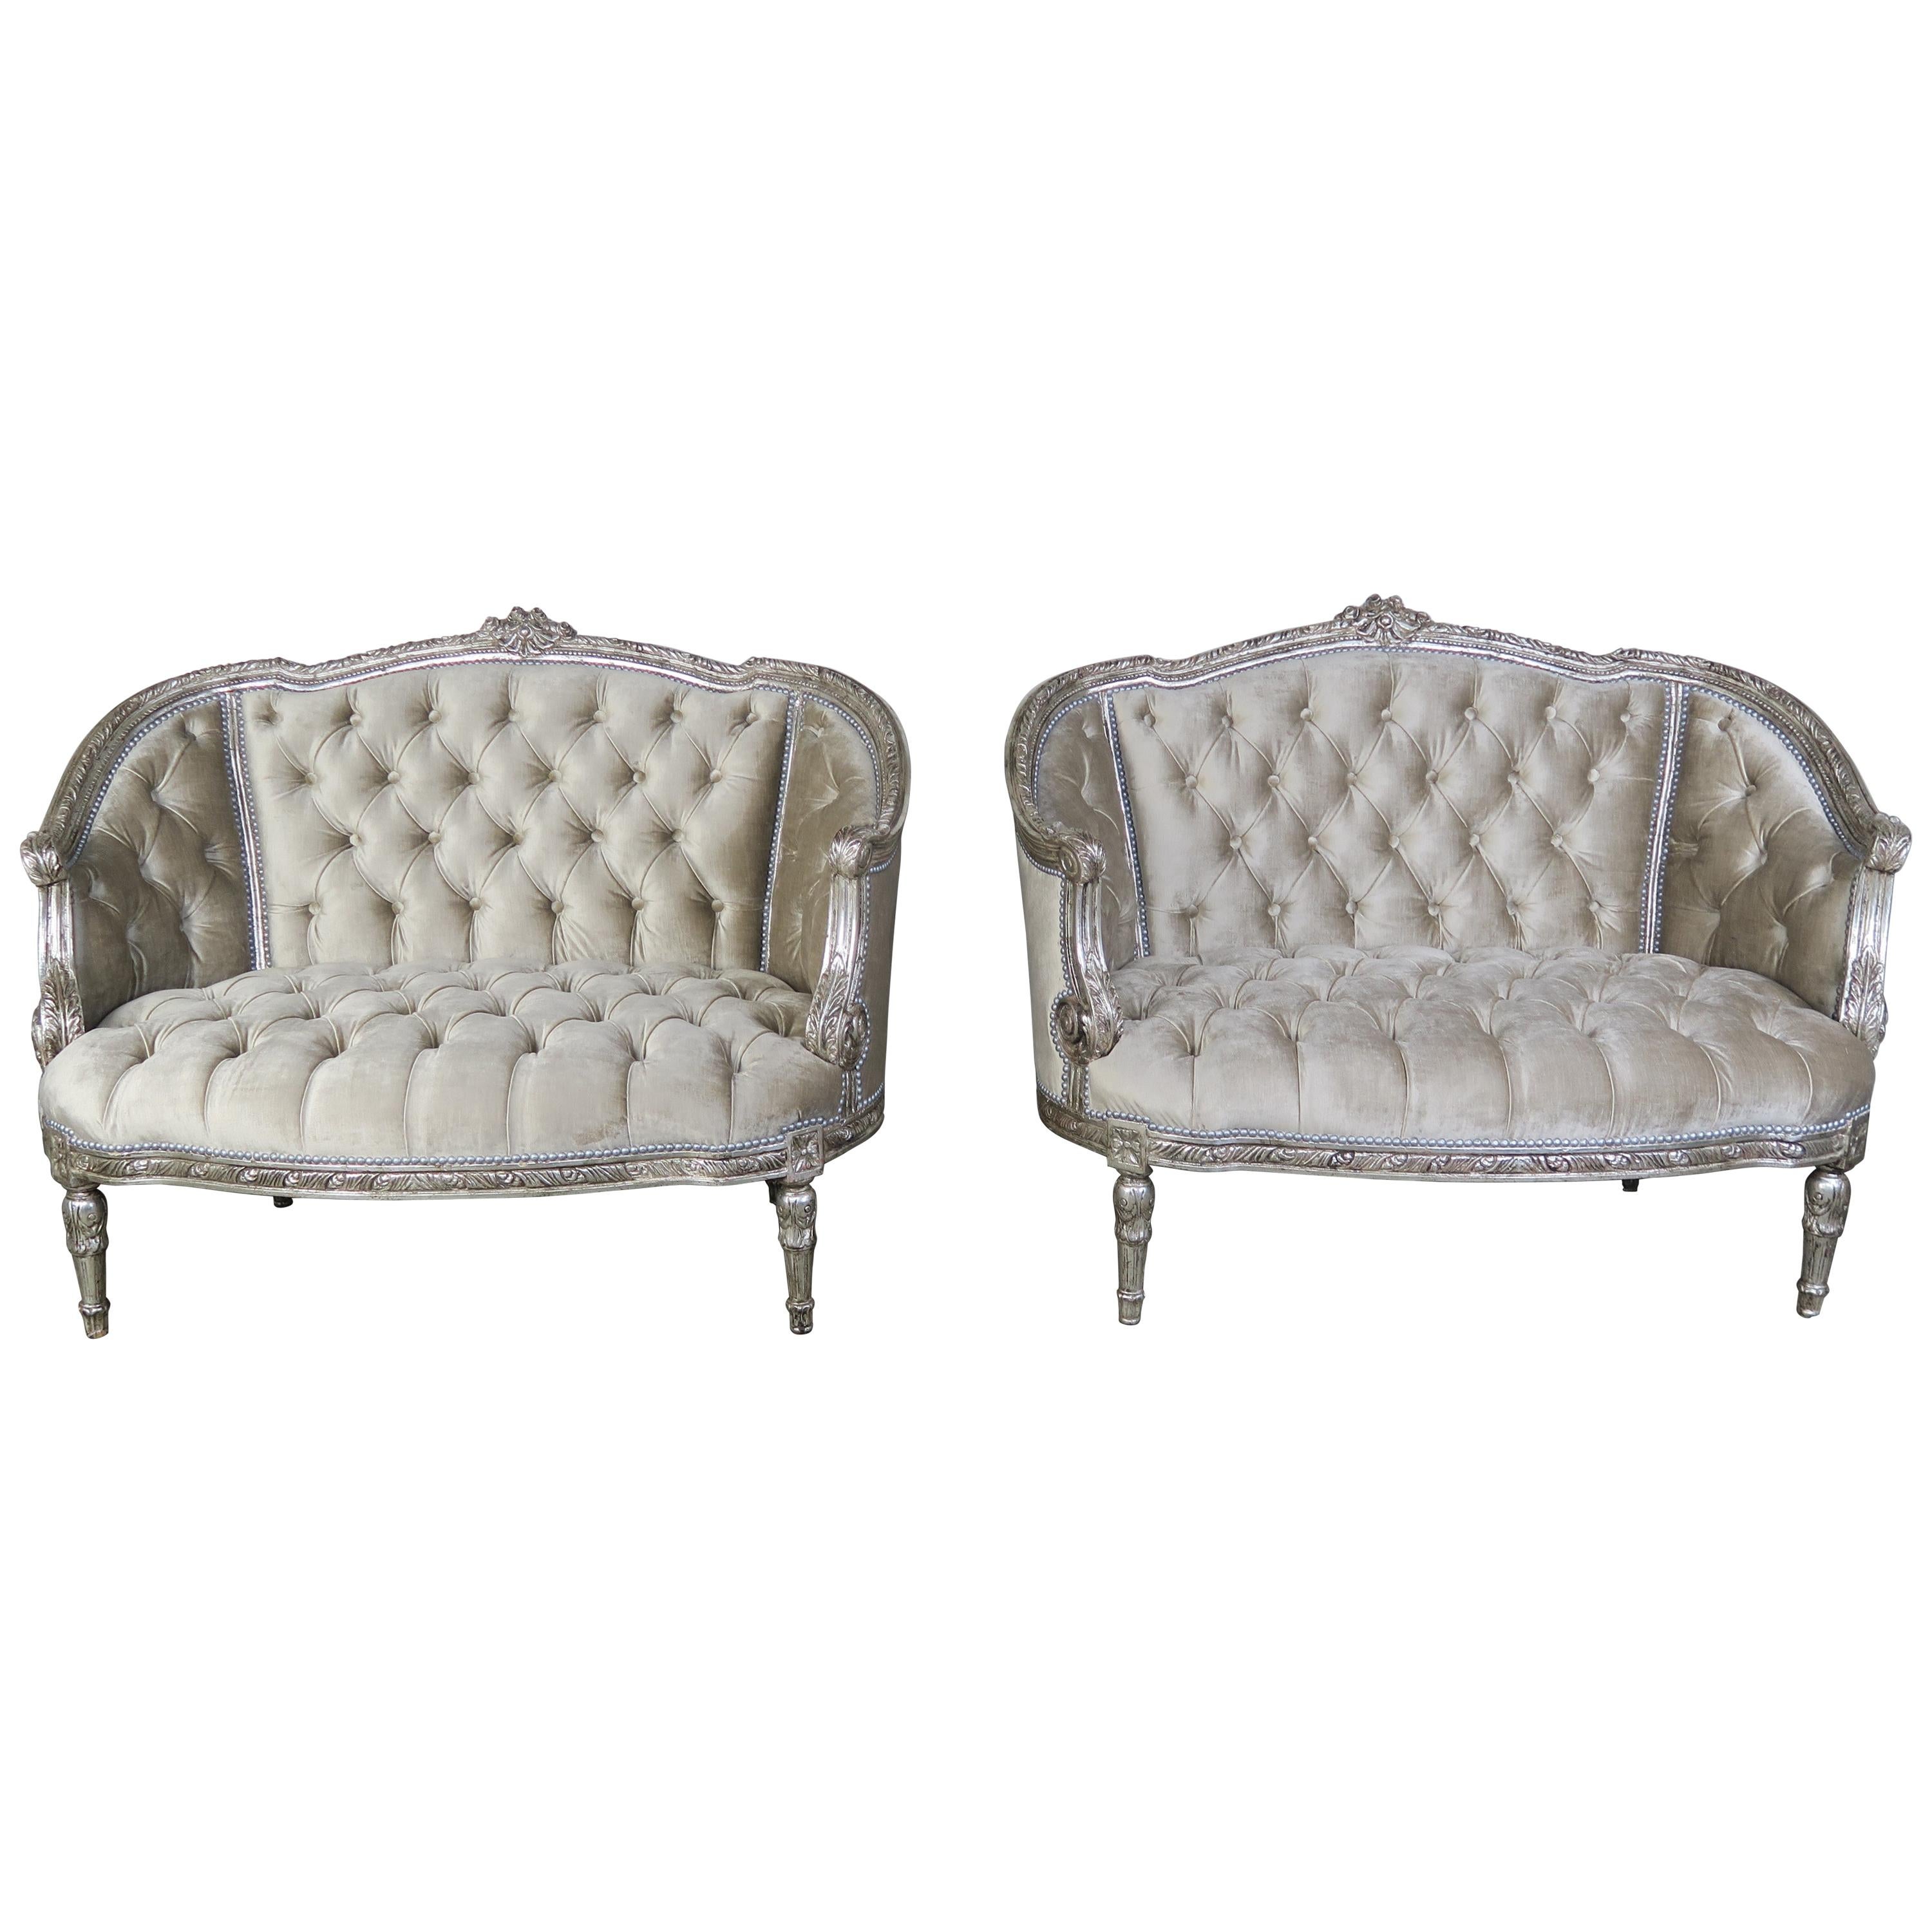 1930s French Carved Silver Gilt Velvet Tufted Settees, Pair For Sale